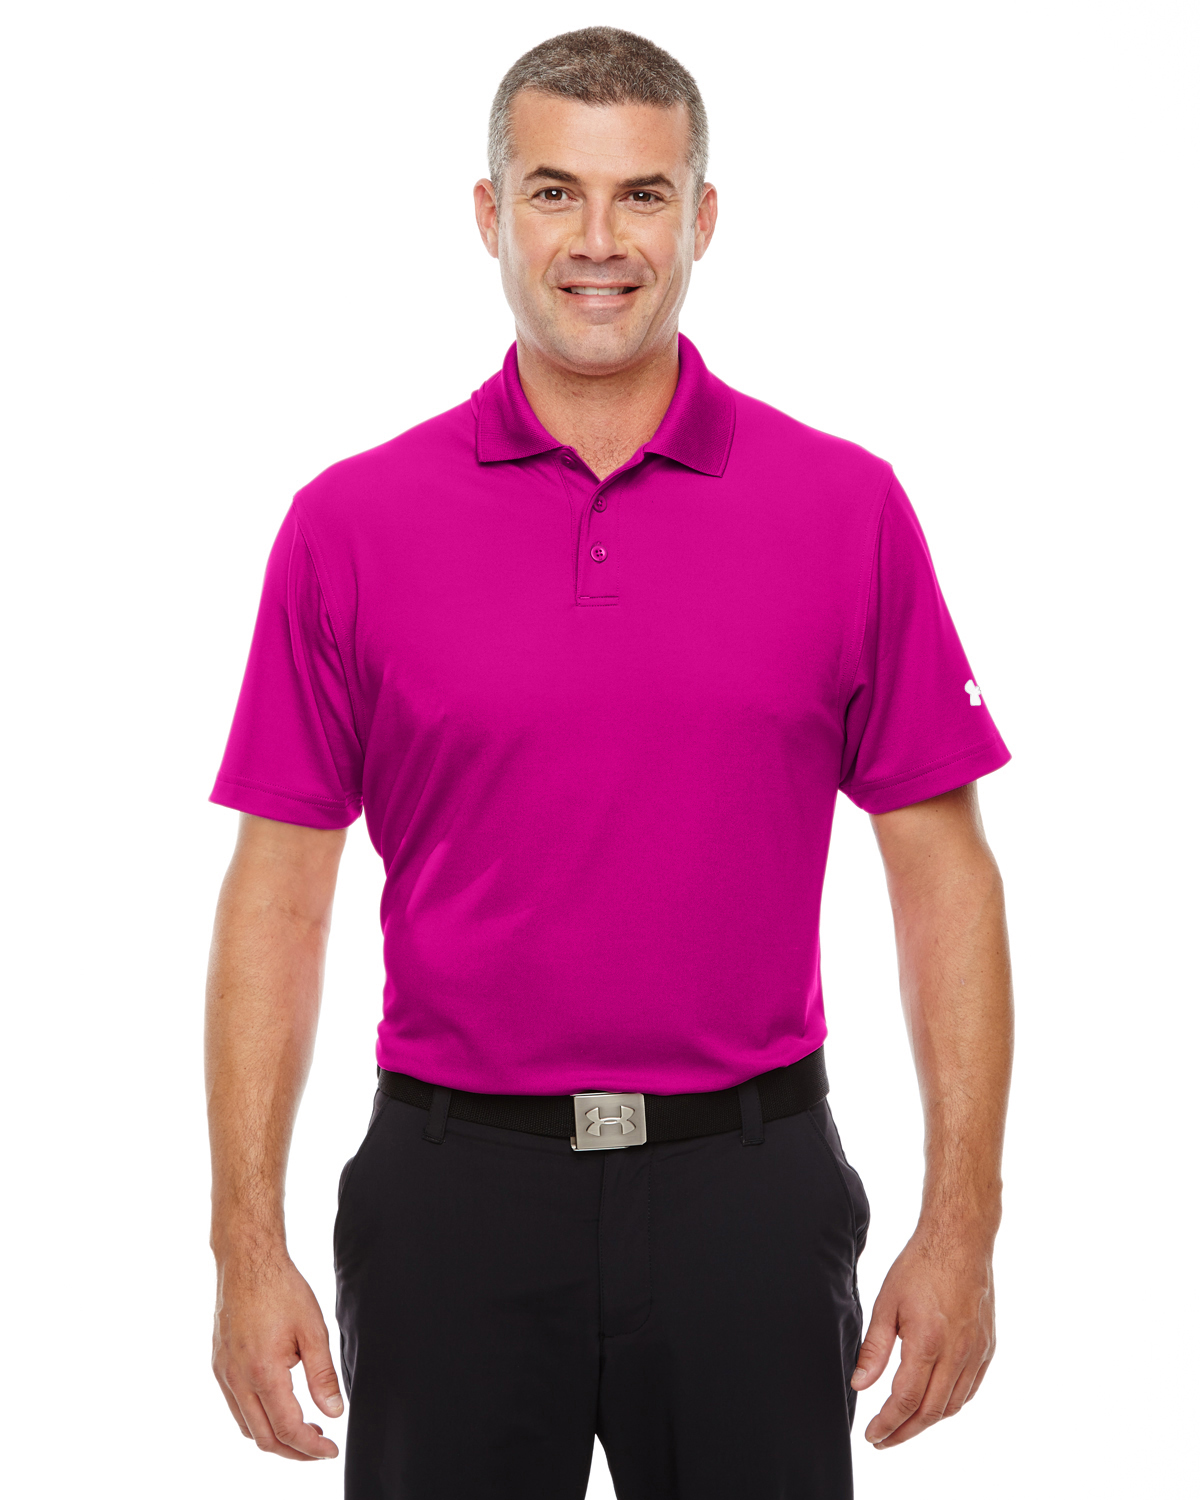 Under Armour Men’s Corp Performance Polo